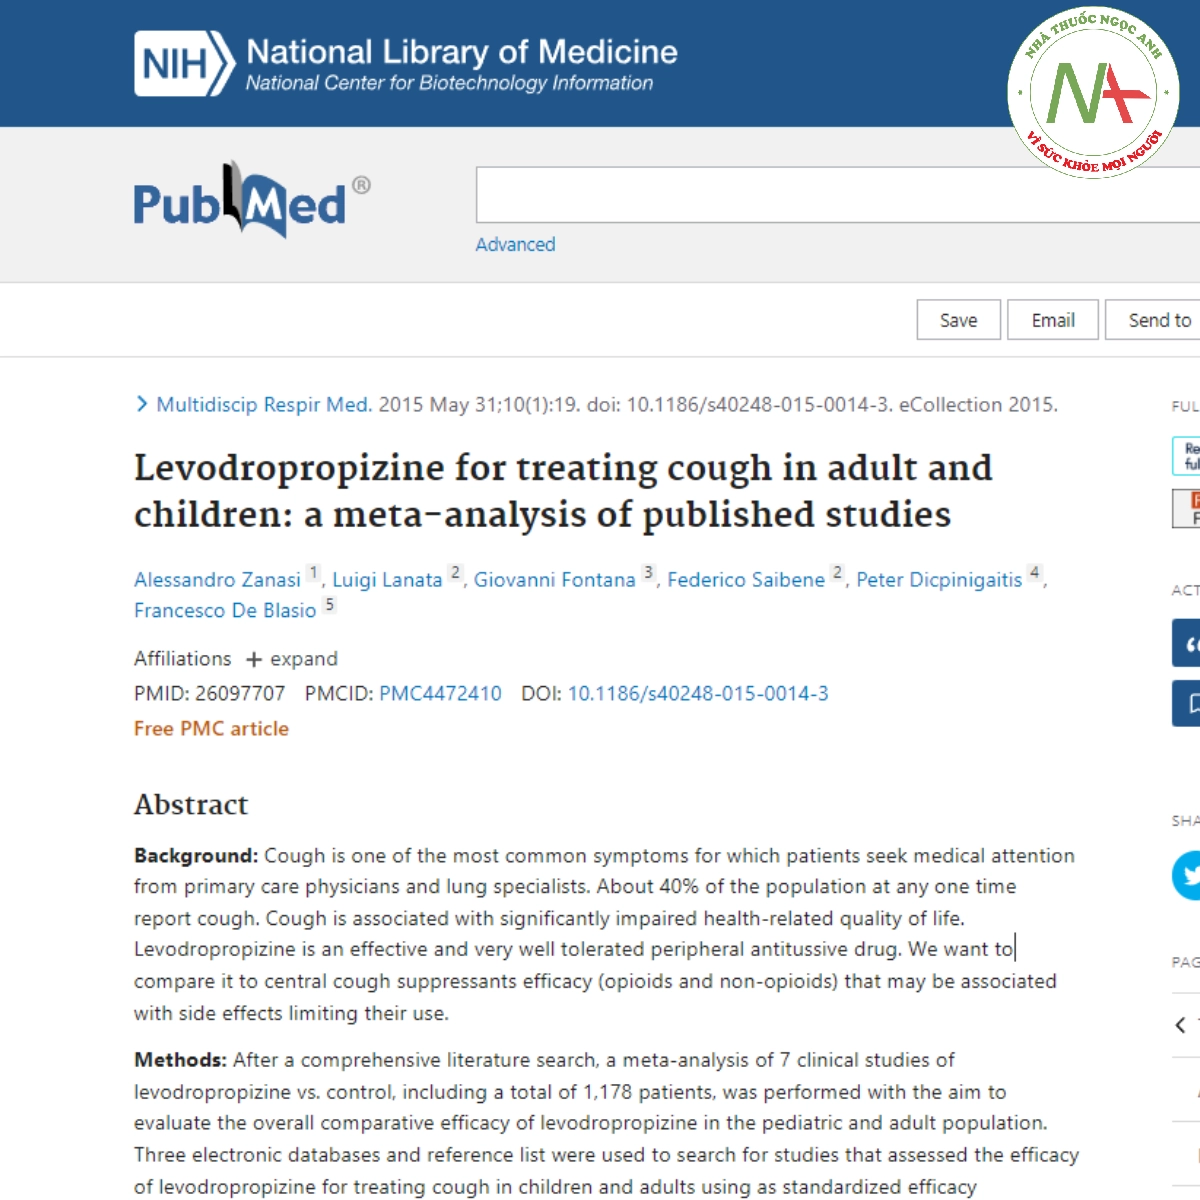 Levodropropizine for treating cough in adult and children_ a meta-analysis of published studies